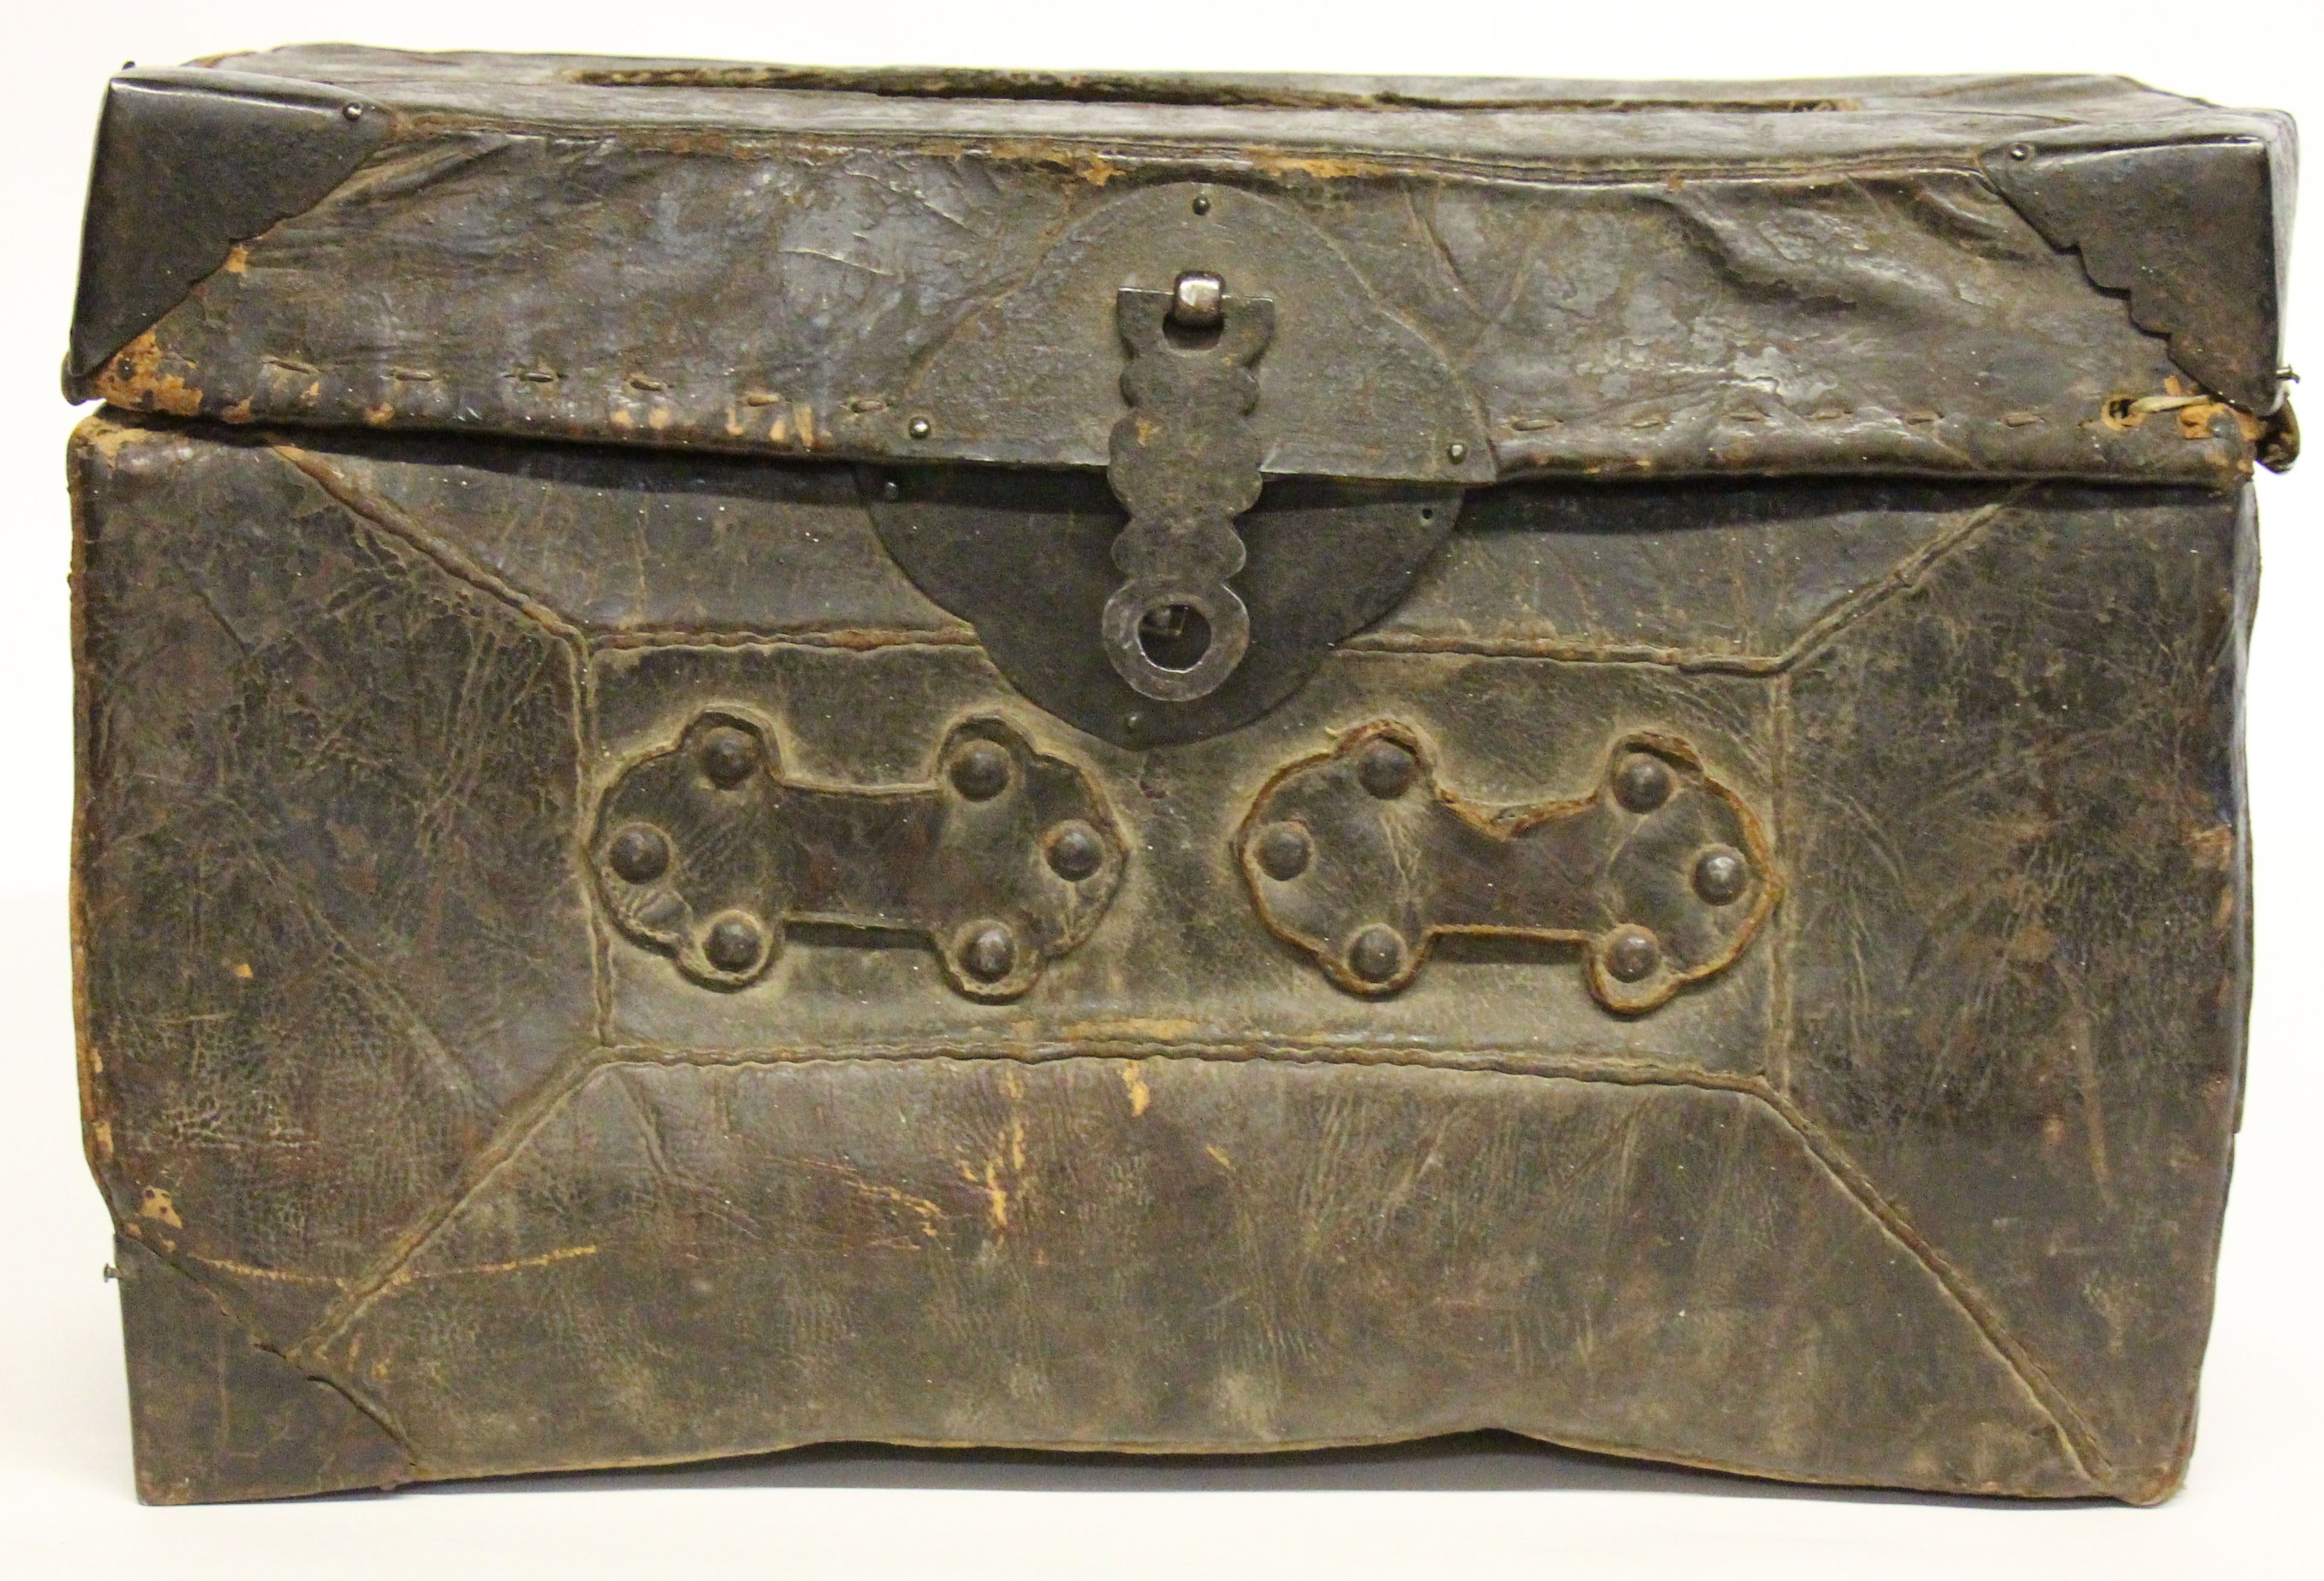 African Leather Trunk